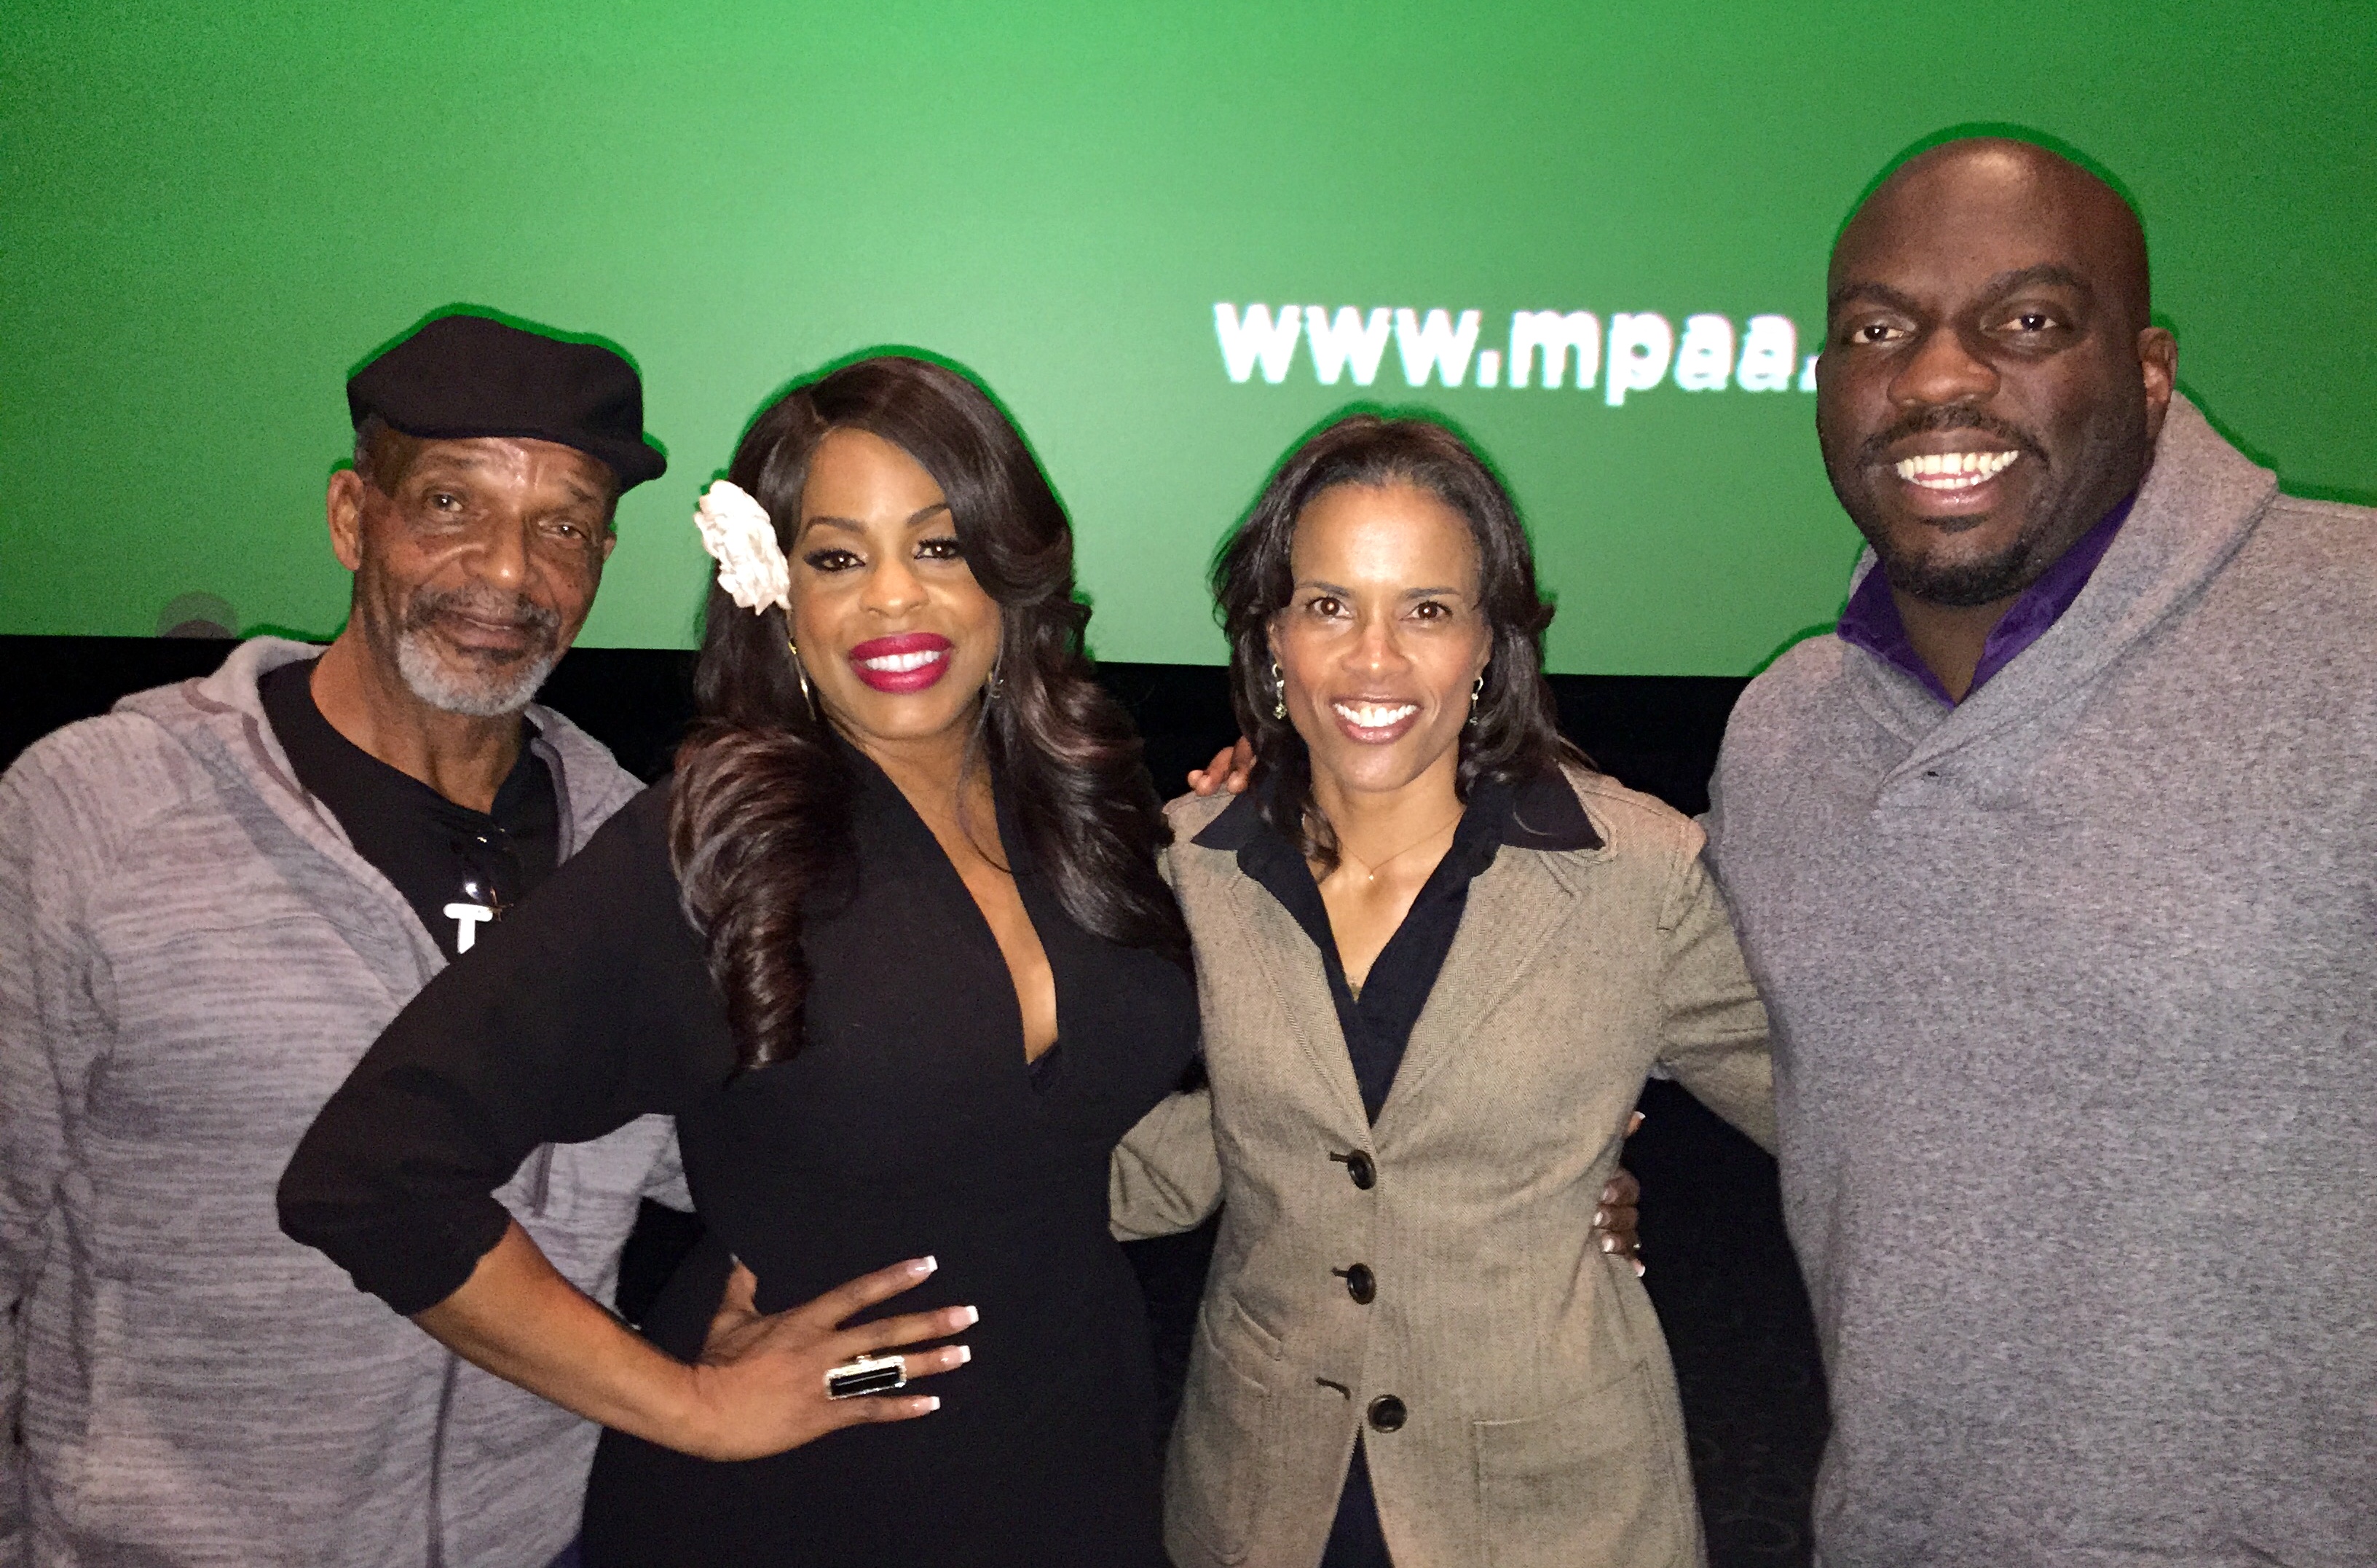 Selma screening event at Arclight Cinemas, Hollywood with Selma cast members Henry G. Sanders, Neicy Nash and Omar J. Dorsey. Moderator, Jen Friesen